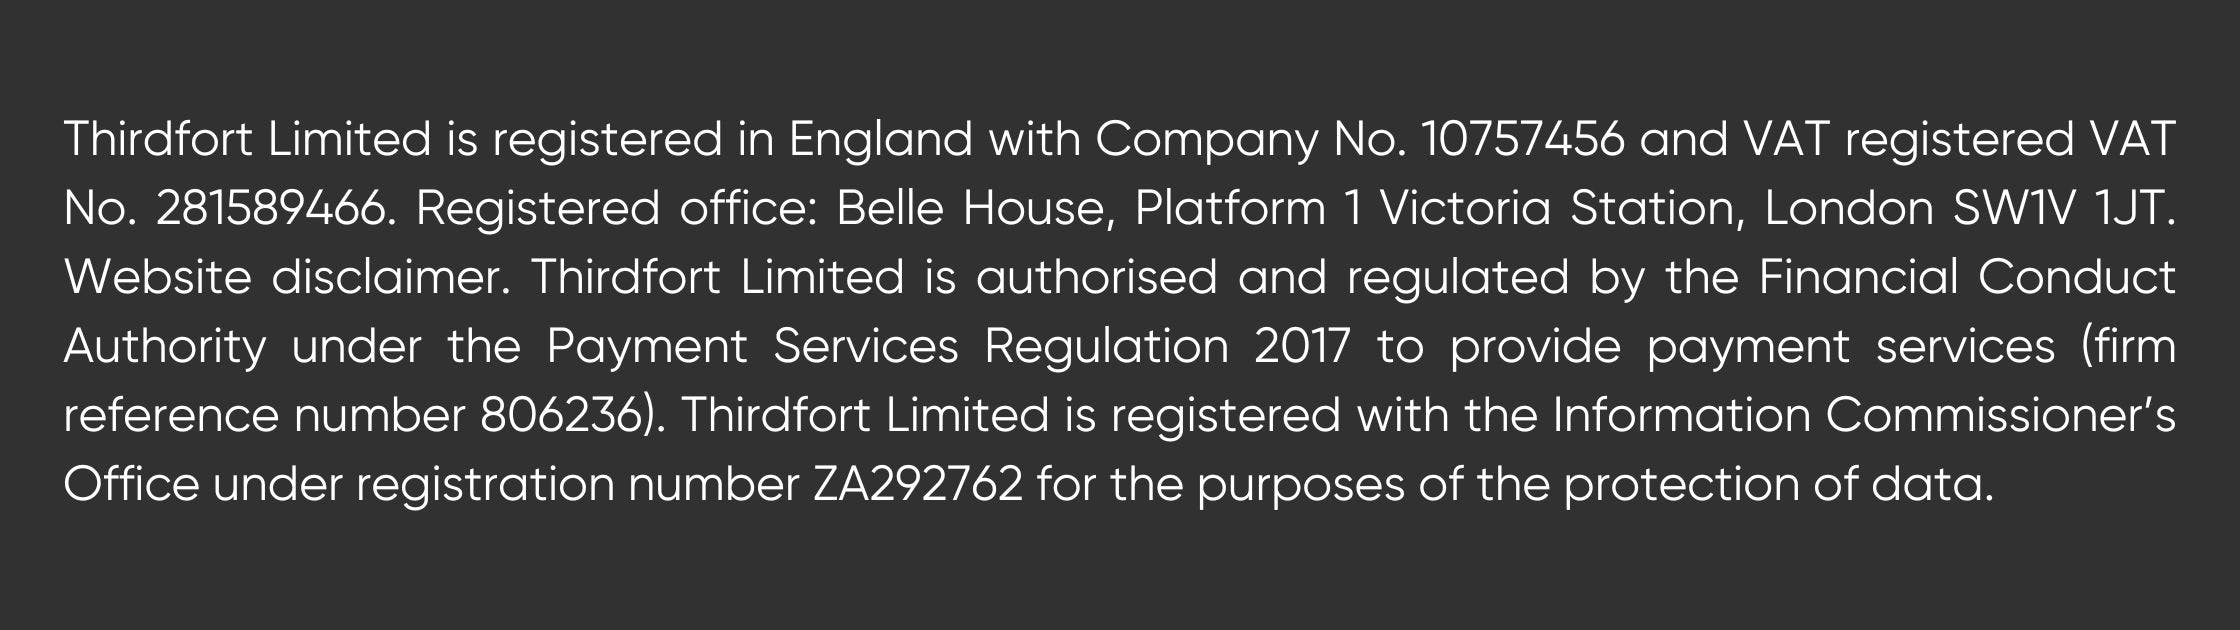 Thirdfort Limited is registered in England with Company No. 10757456 and VAT registered VAT No. 281589466. Registered office: Belle House, Platform 1 Victoria Station, London SW1V 1JT. Website disclaimer. Thirdfort Limited is authorised and regulated by the Financial Conduct Authority under the Payment Services Regulation 2017 to provide payment services (firm reference number 806236). Thirdfort Limited is registered with the Information Commissioner’s Office under registration number ZA292762 for the purposes of the protection of data.